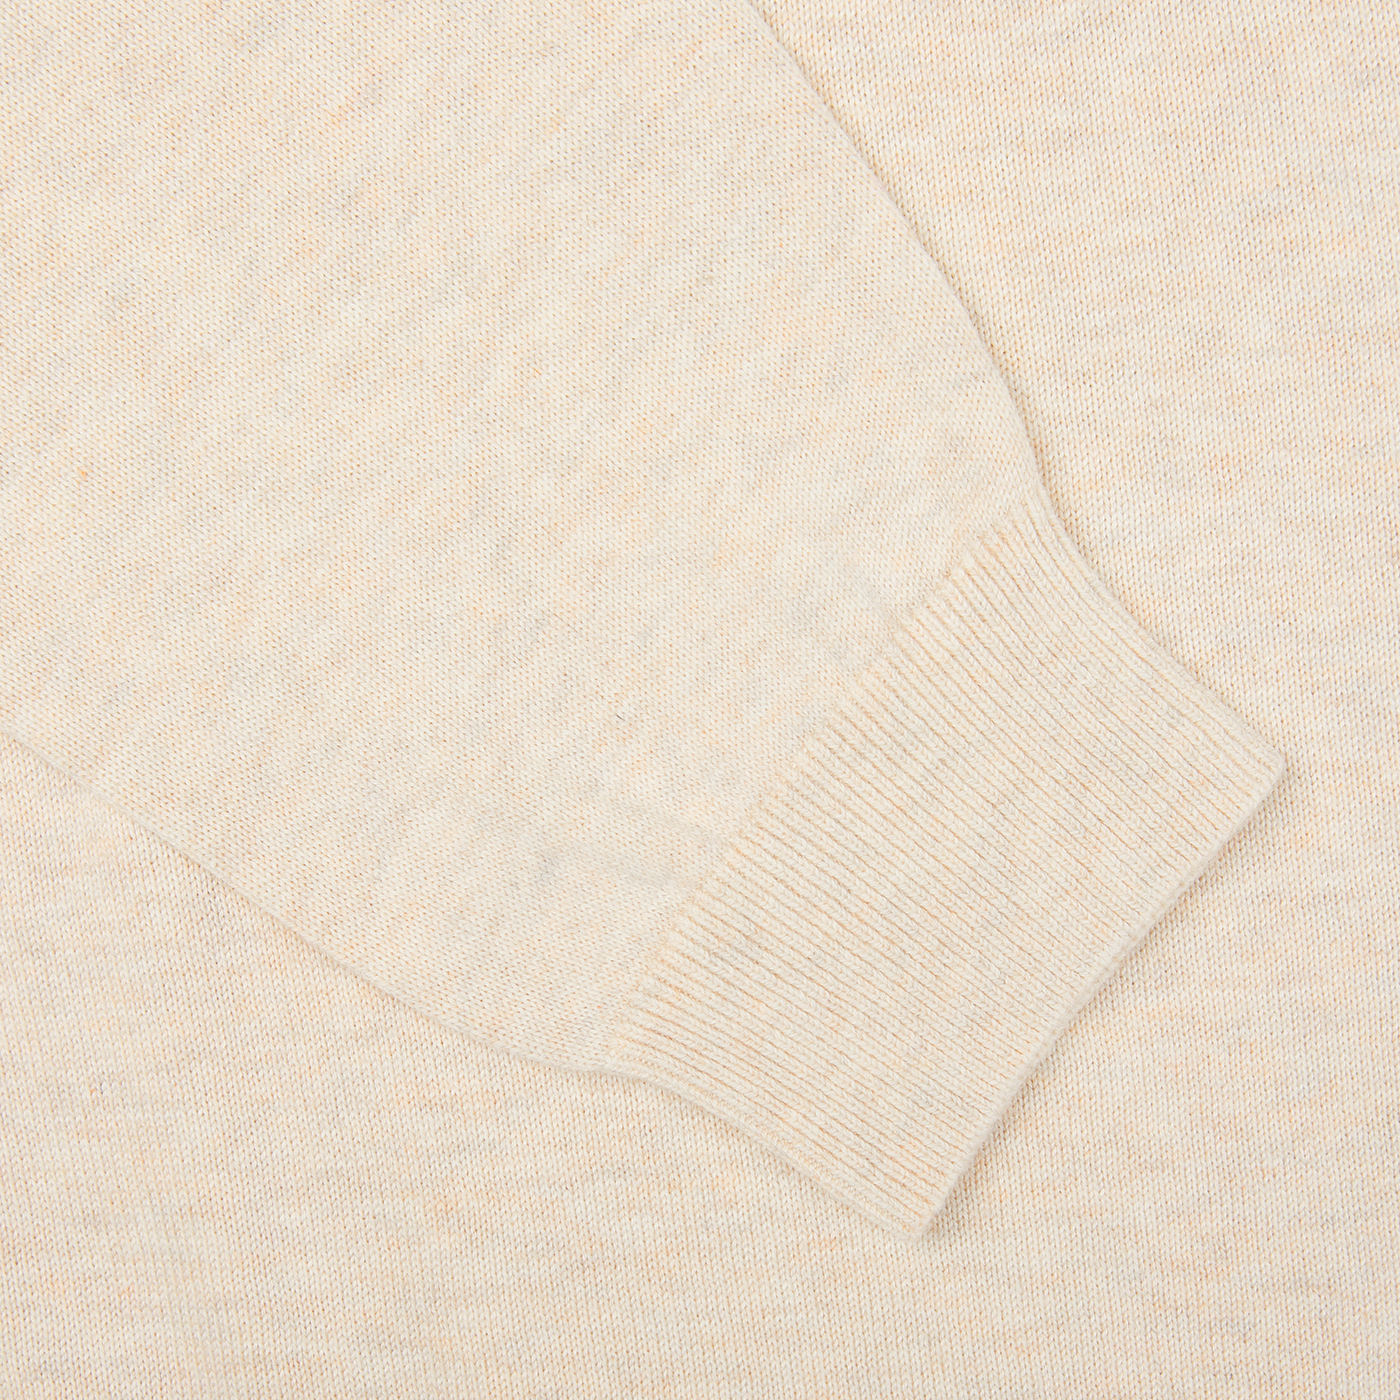 A close up of a Light Beige Luxury Cotton Crewneck Alan Paine sweater on a white surface.